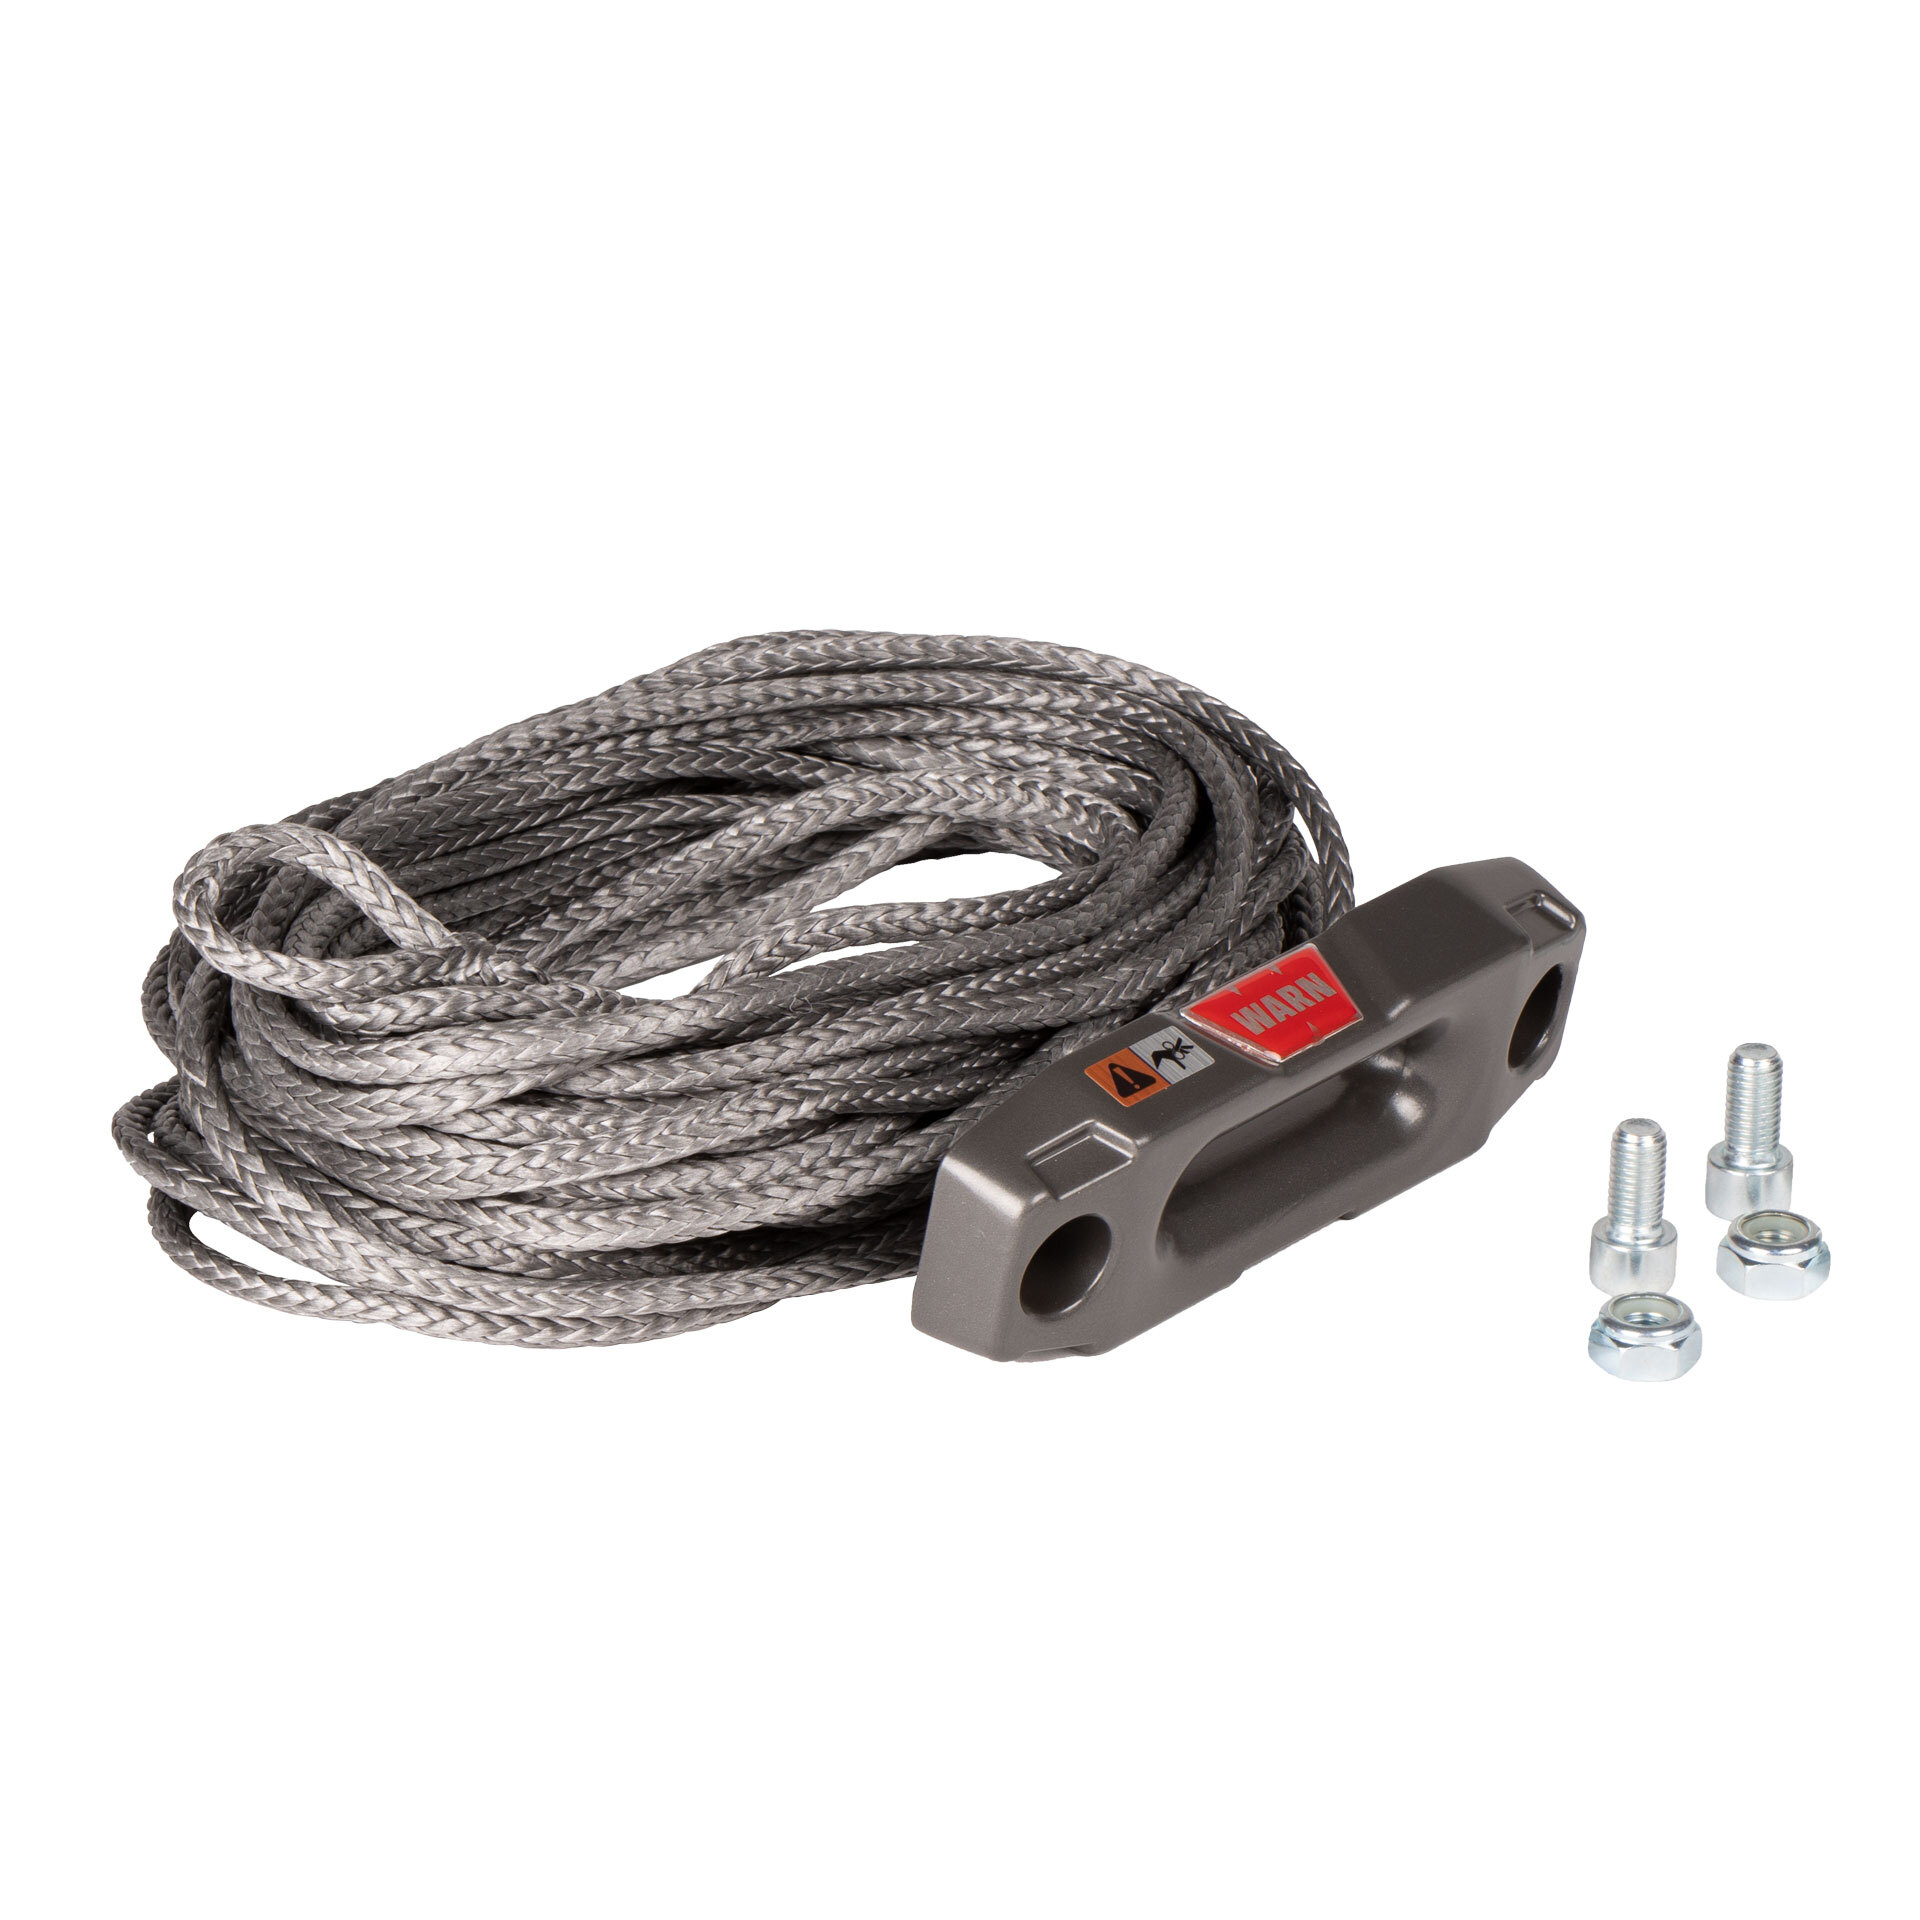 WARN® VRX 2500/3500 Synthetic Rope Upgrade Kit